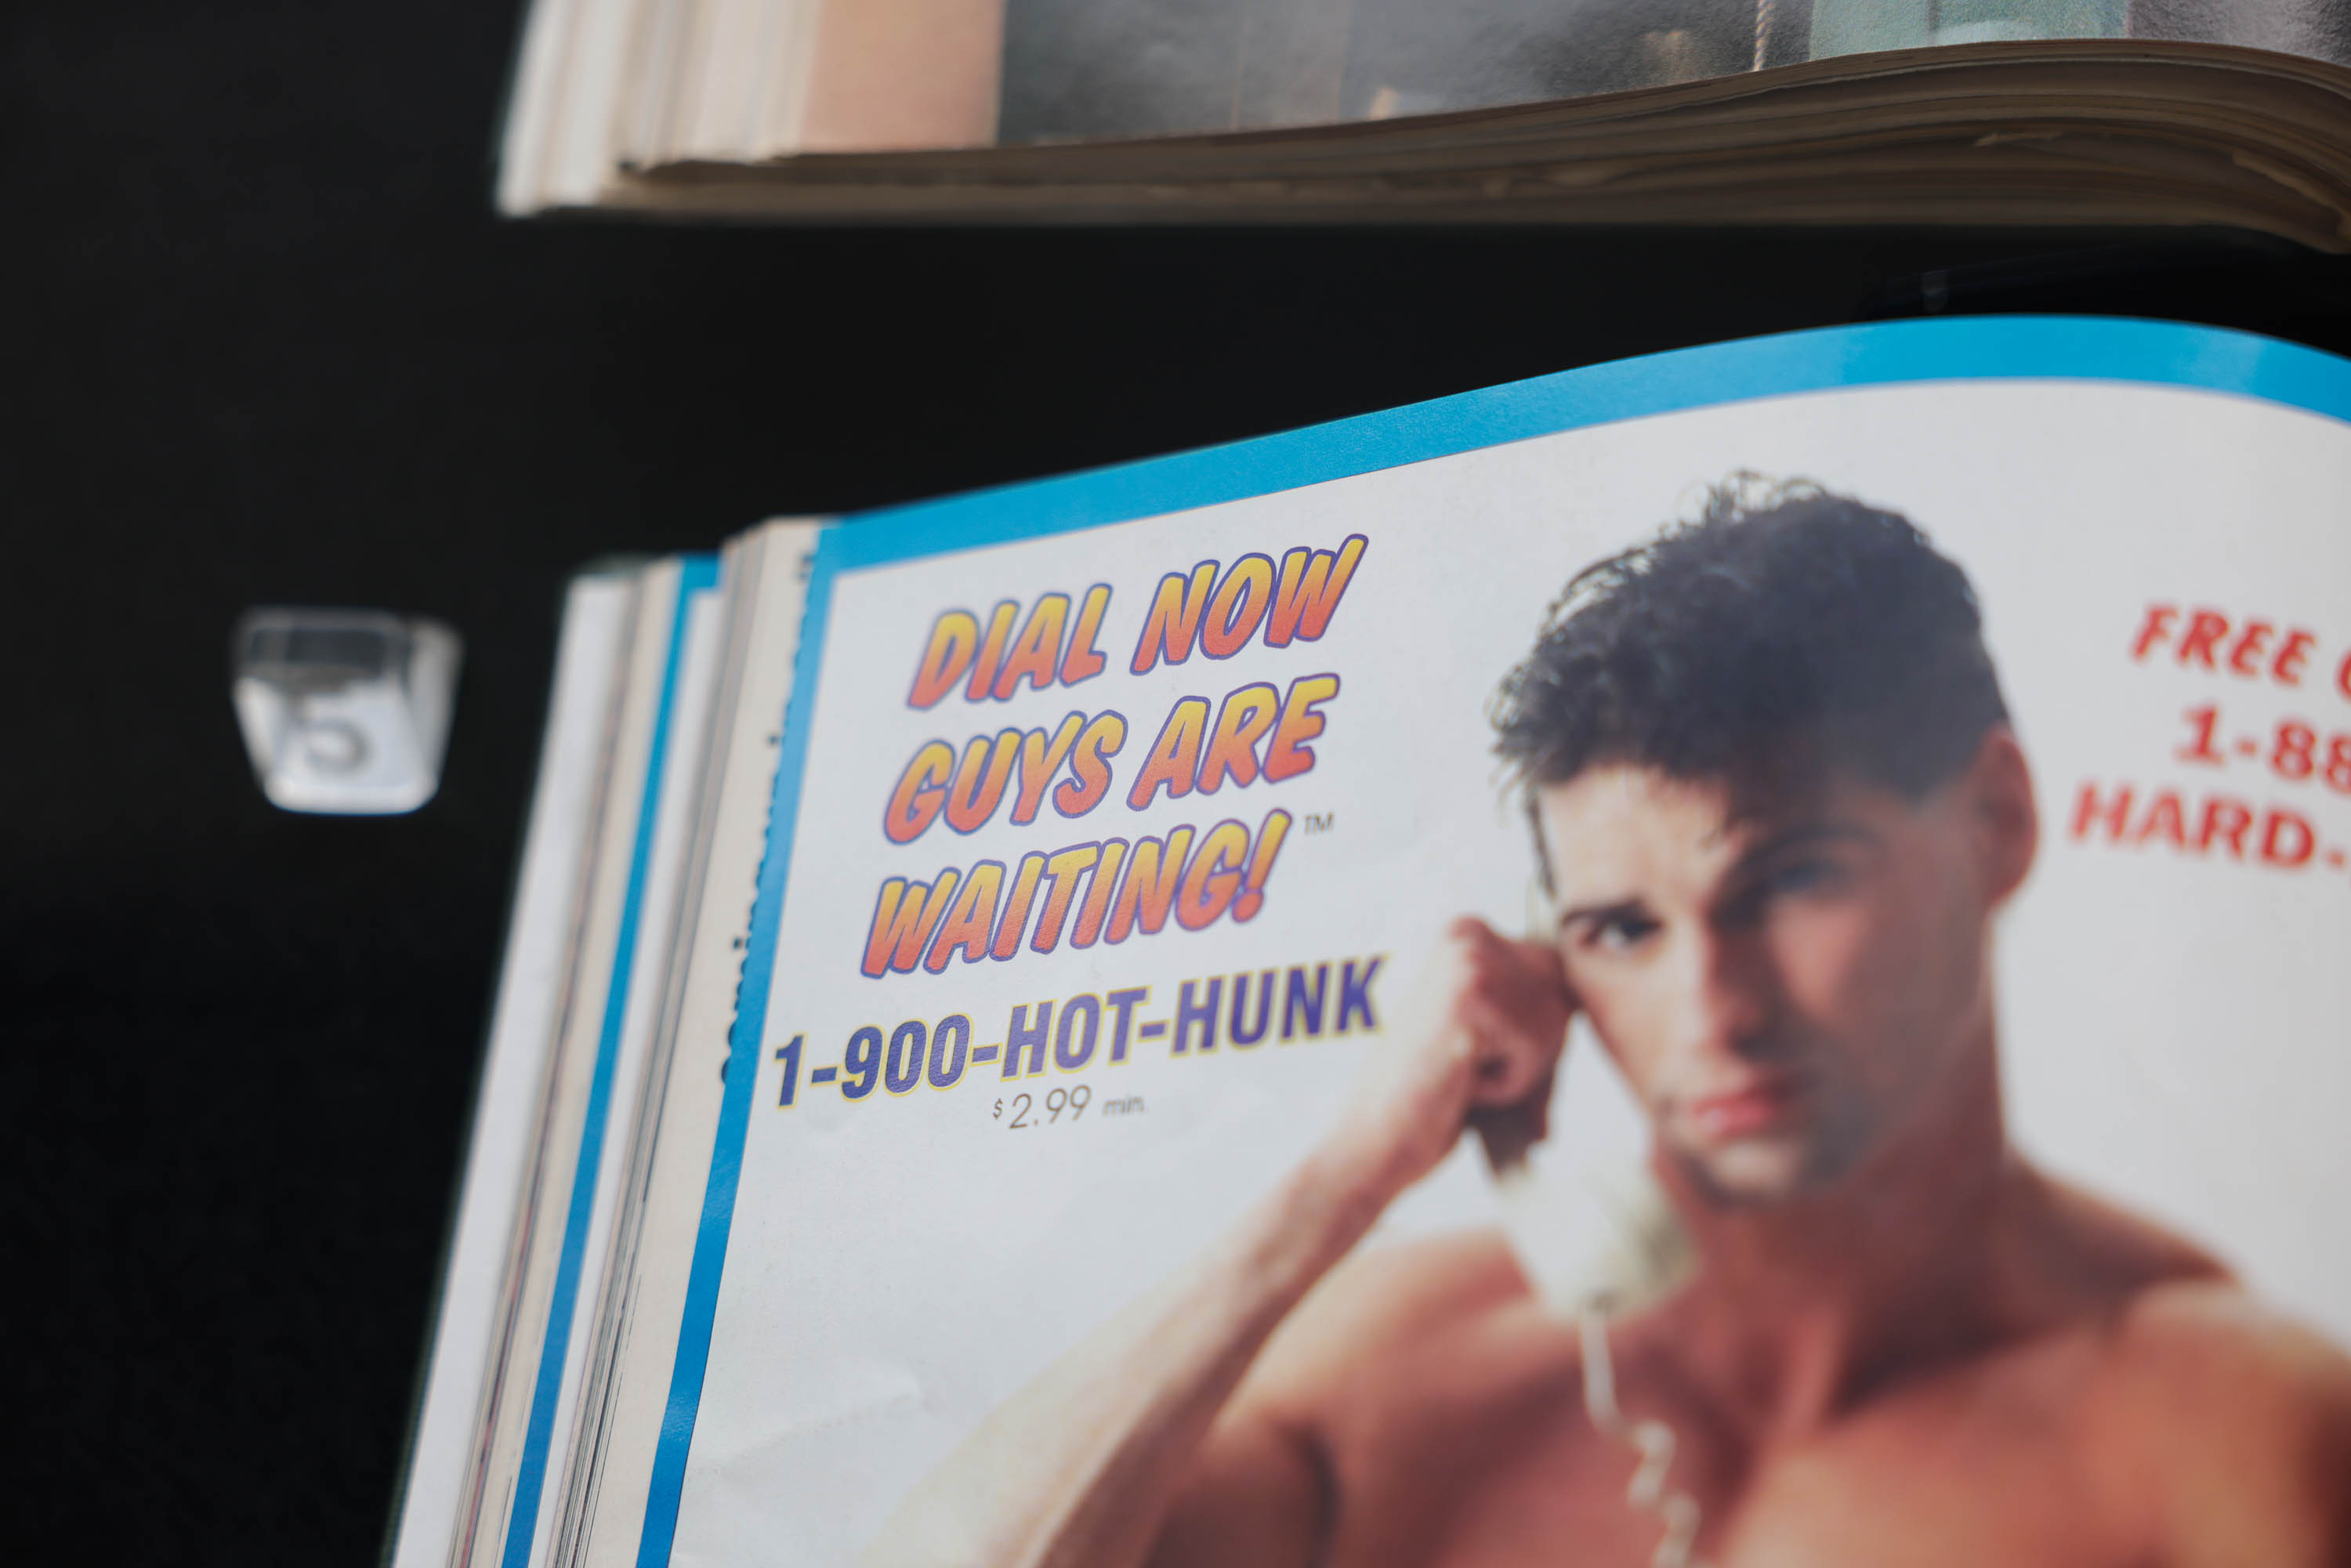 An ad with a shirtless man holding a phone reads &quot;DIAL NOW GUYS ARE WAITING! 1-900-HOT-HUNK $2.99/min.&quot;